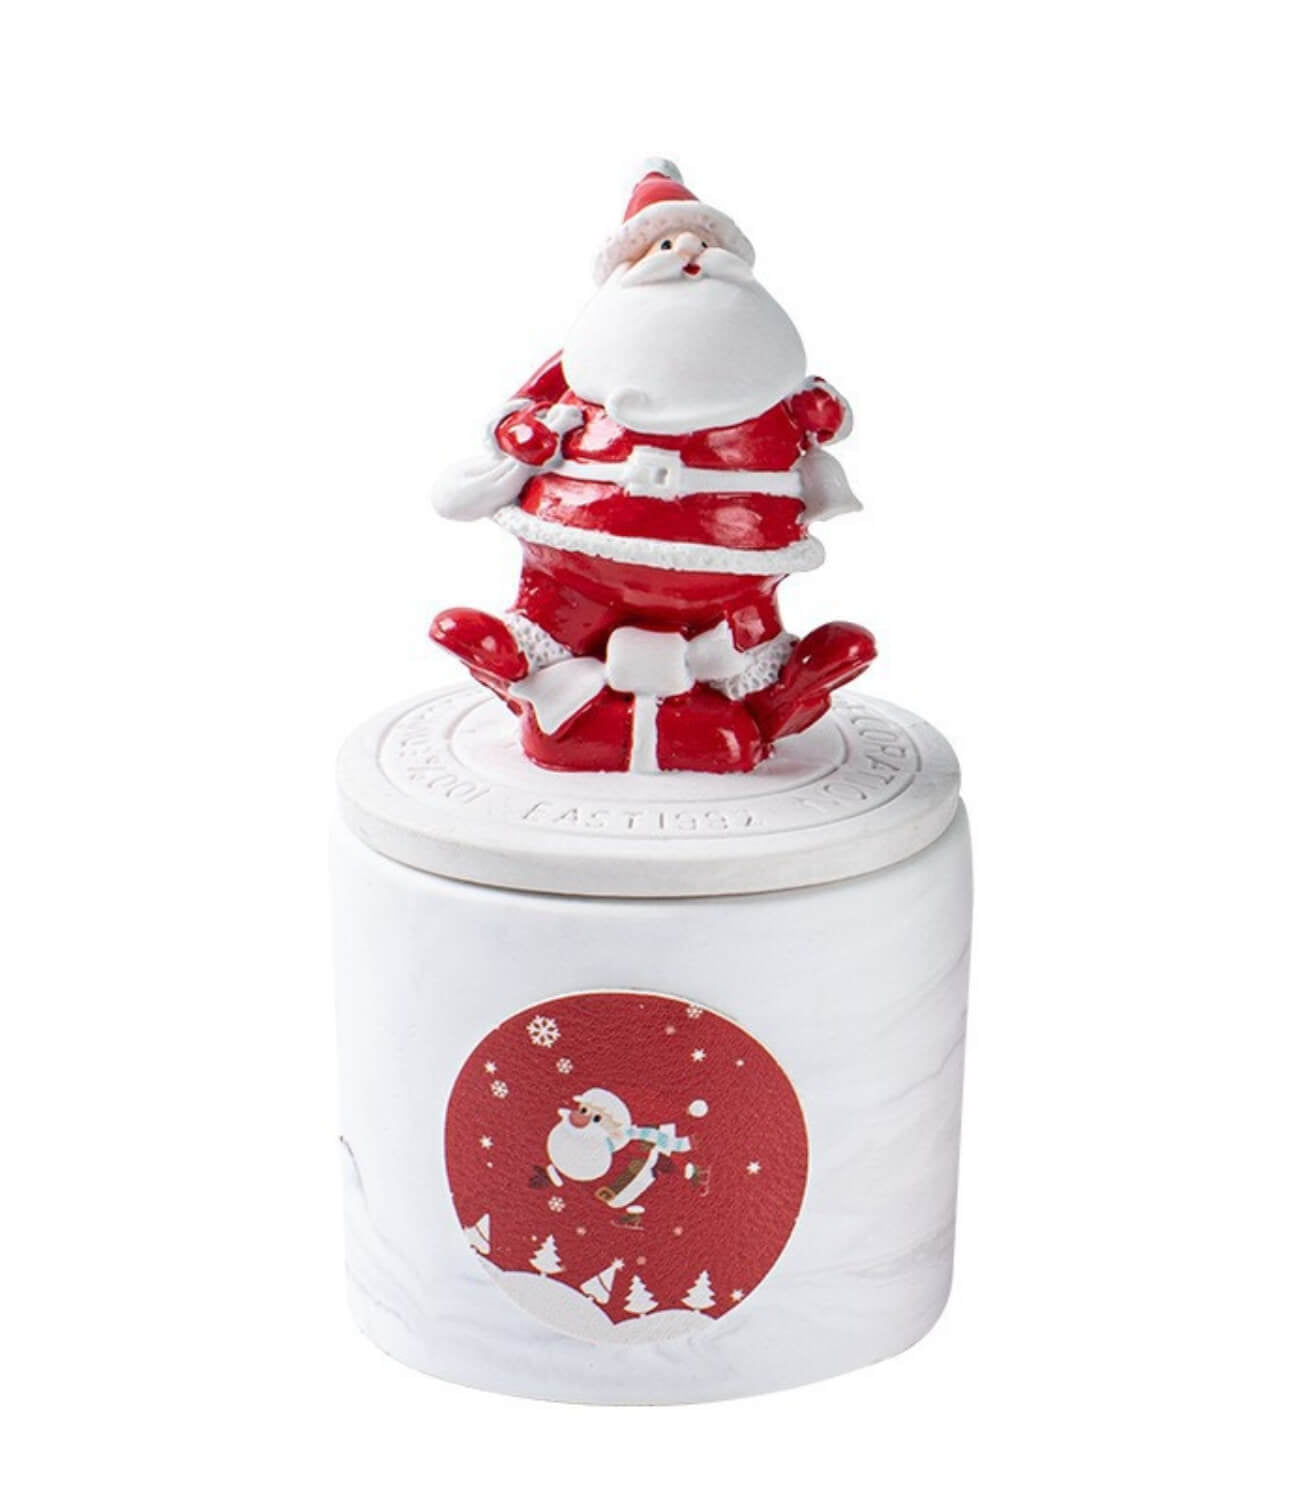 An adorable Santa Claus-shaped scented candle, dressed in a festive red robe.